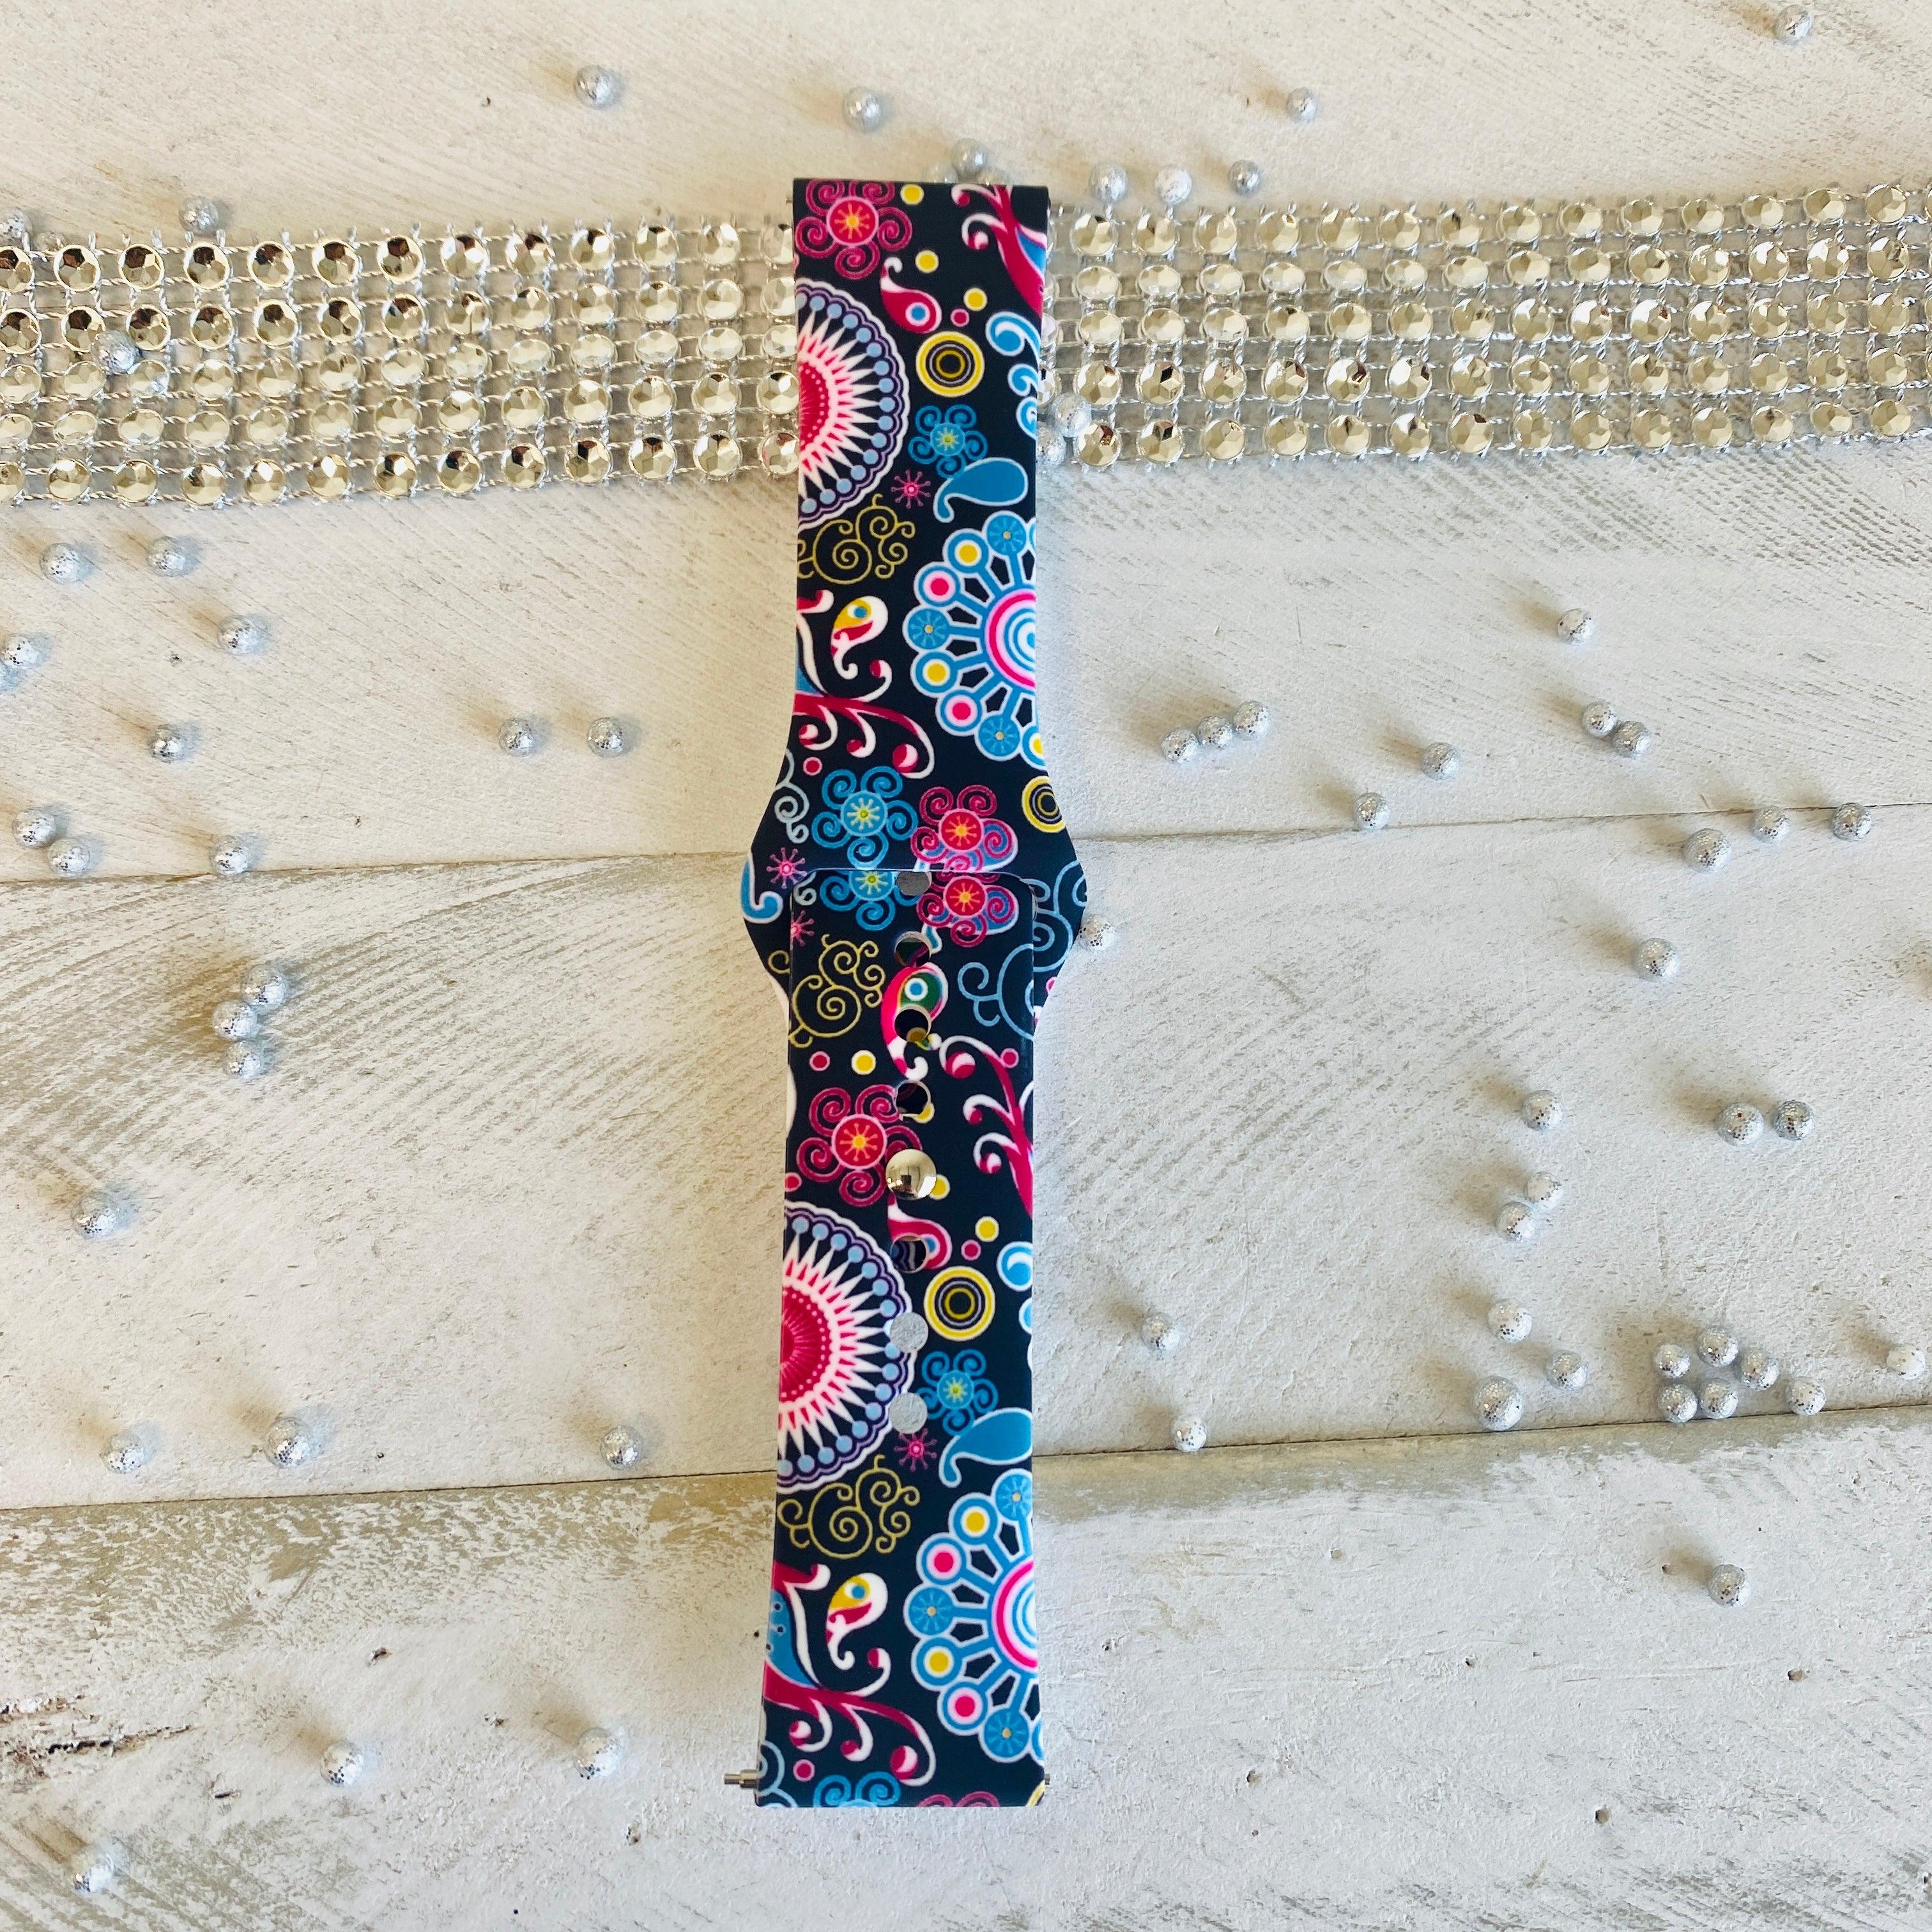 Fancy Bands Colorful Paisley Silicone Apple Watch Band